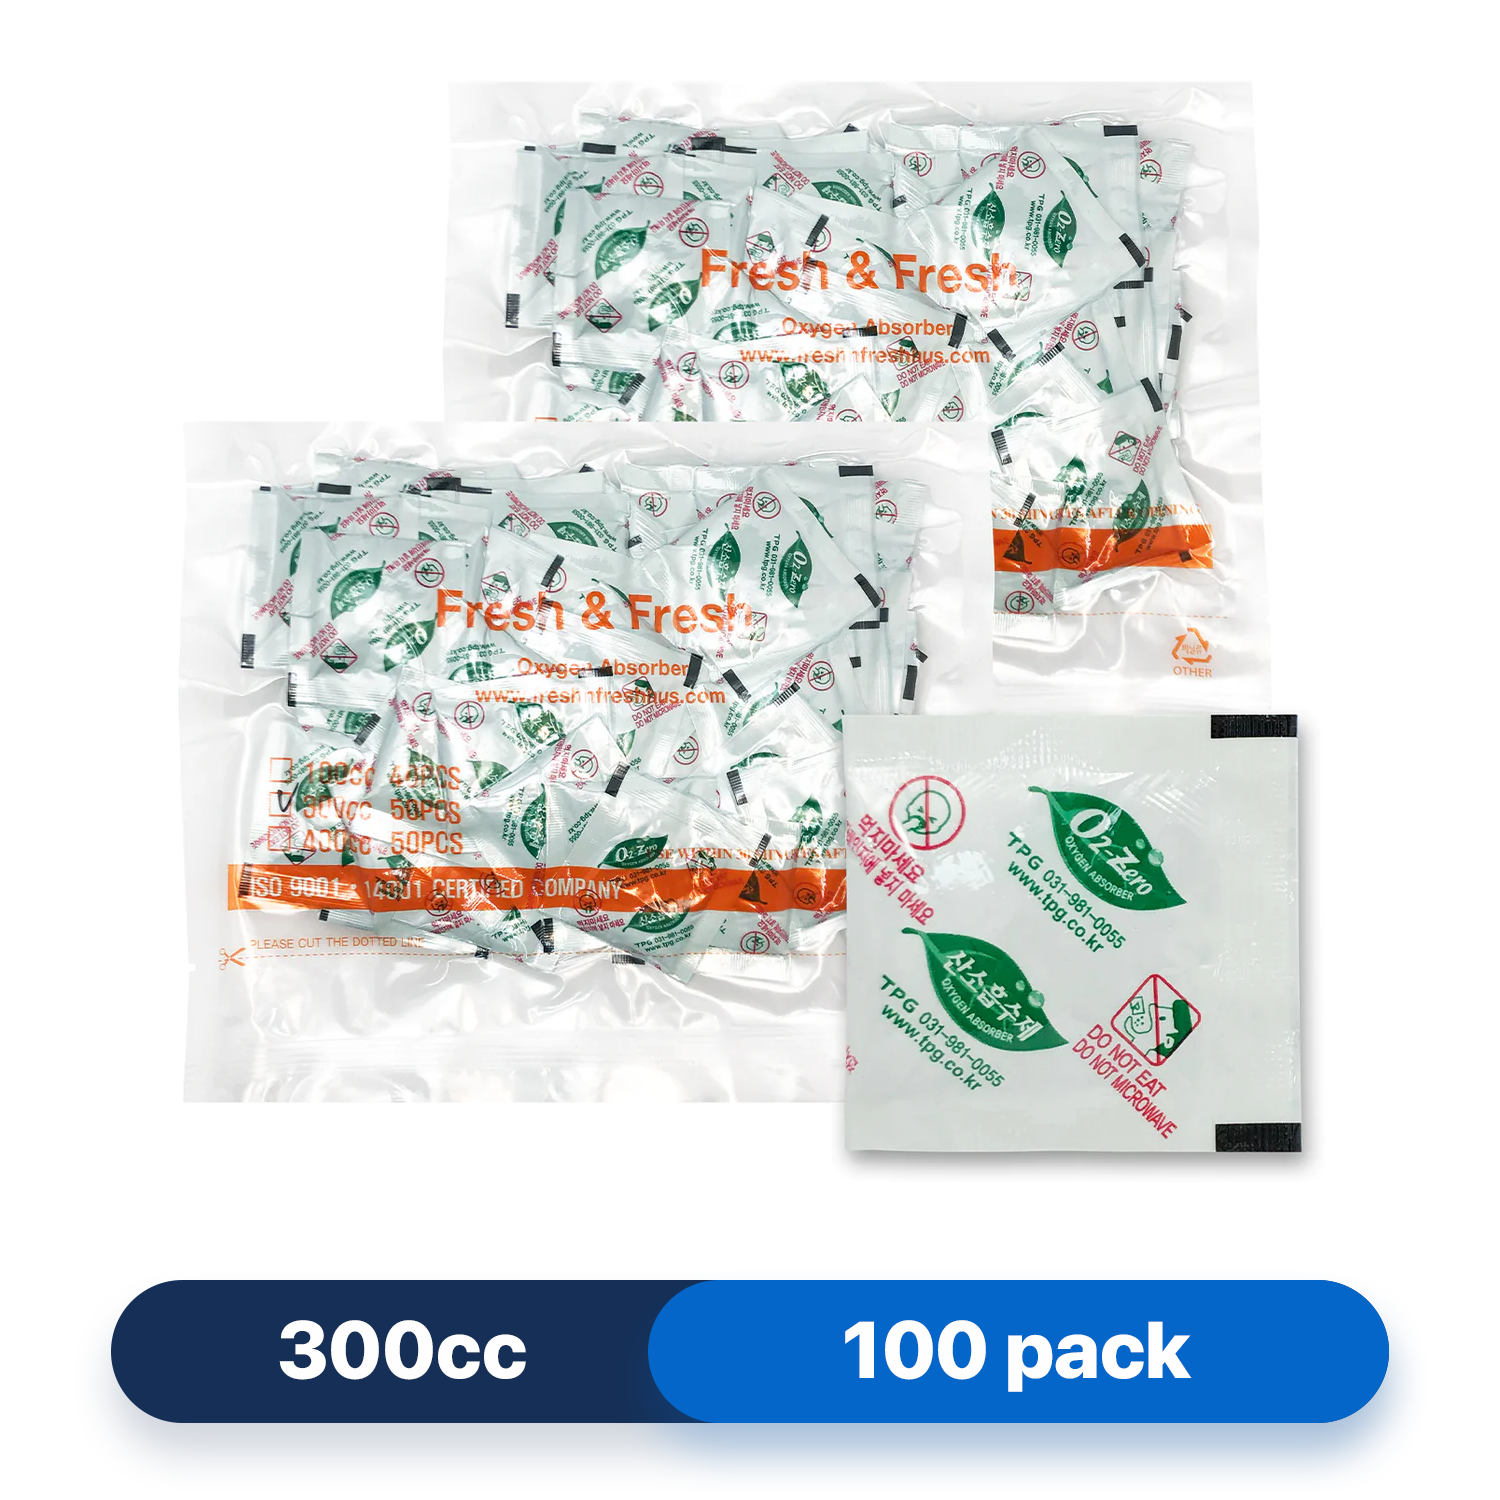 Fresh & Fresh (100 Packs) 300 CC Premium Oxygen Absorbers(2 Bag of 50 Packets) - ISO 9001 Certified Facility Manufactured